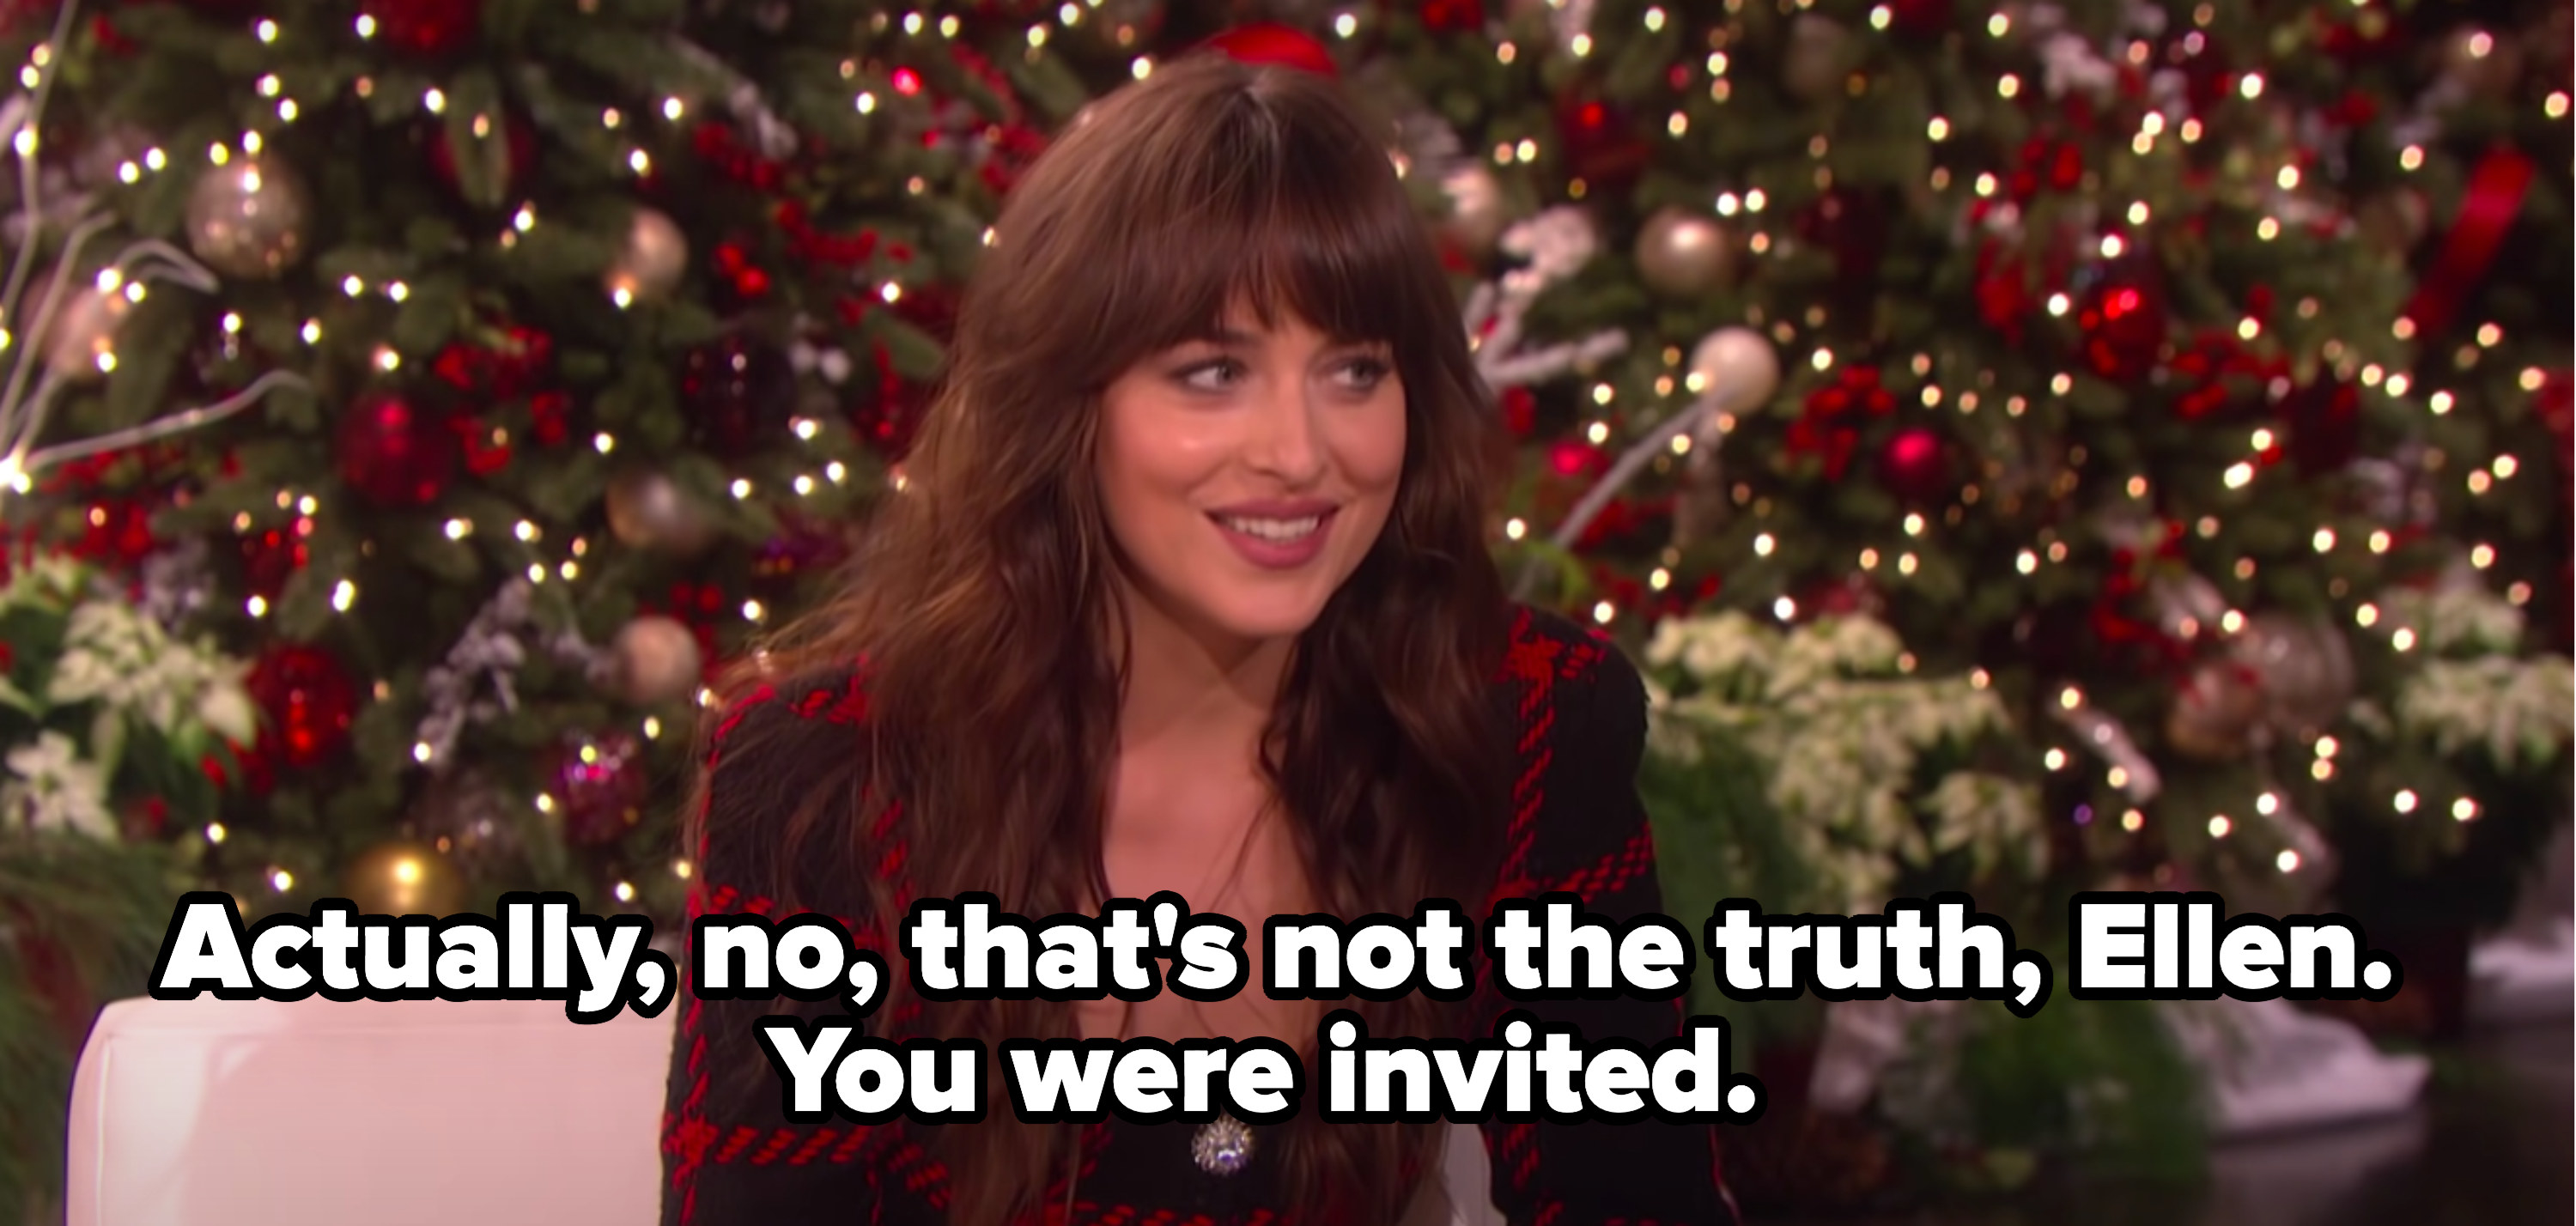 Dakota saying &quot;Actually, no, that&#x27;s not the truth, Ellen, you were invited&quot;